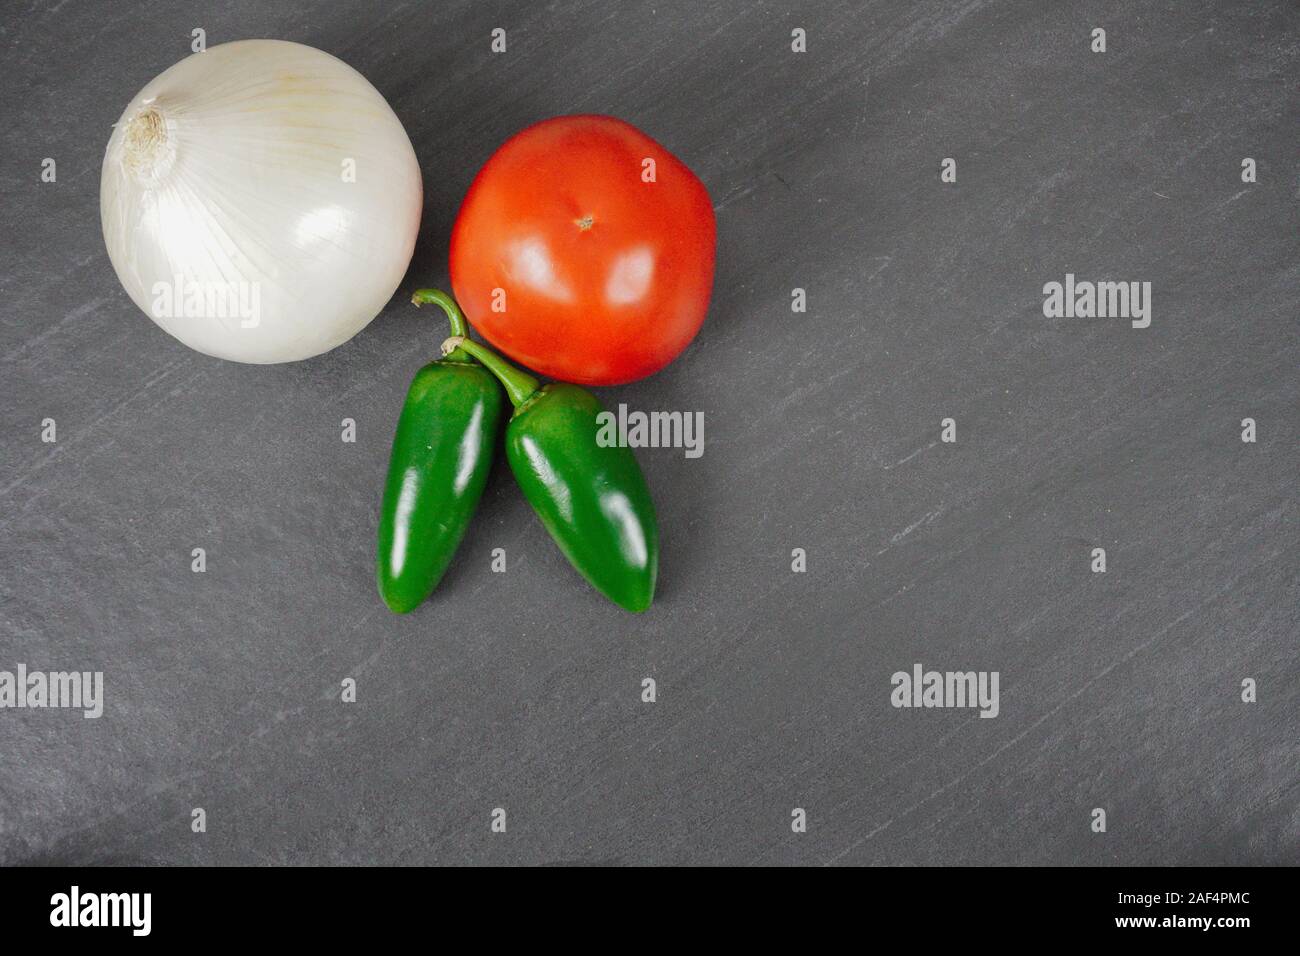 Ingredients for salsa- jalapenos, a tomato and an onion- rest on a gray slate cutting board- food preparation Stock Photo